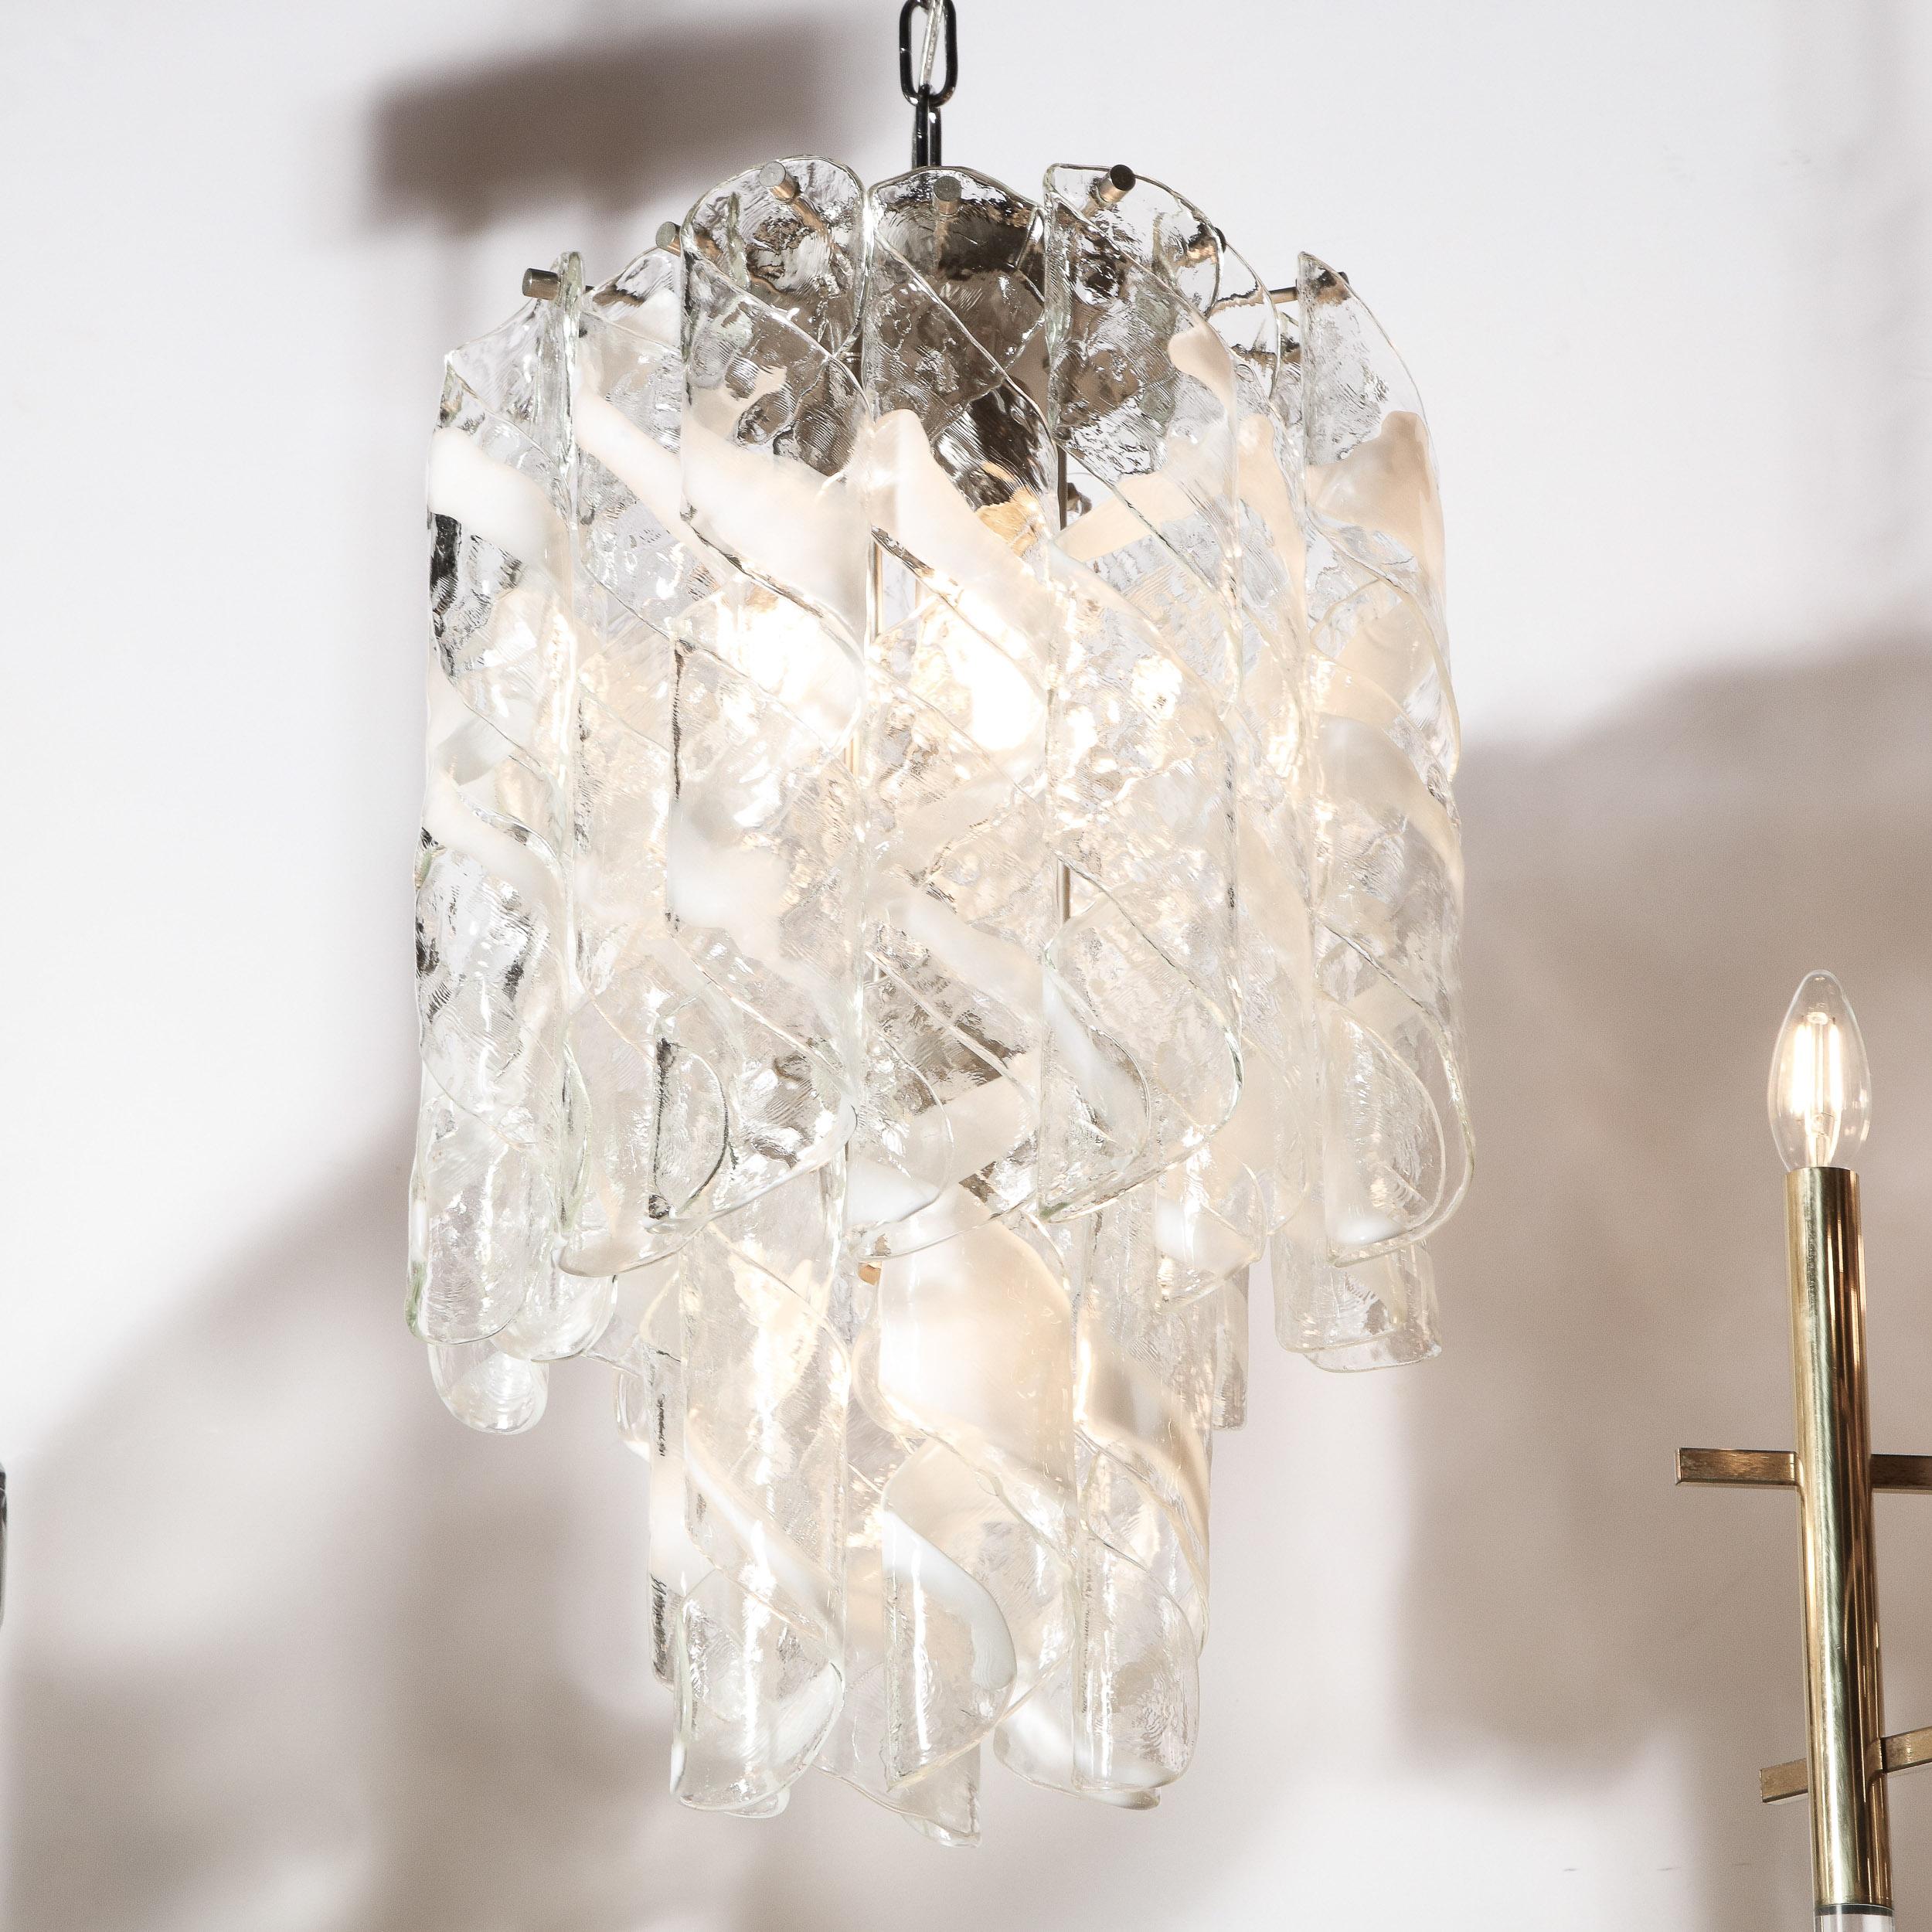 Mid-Century Modern Midcentury Hand Blown Murano Translucent and White Glass Helix Form Chandelier